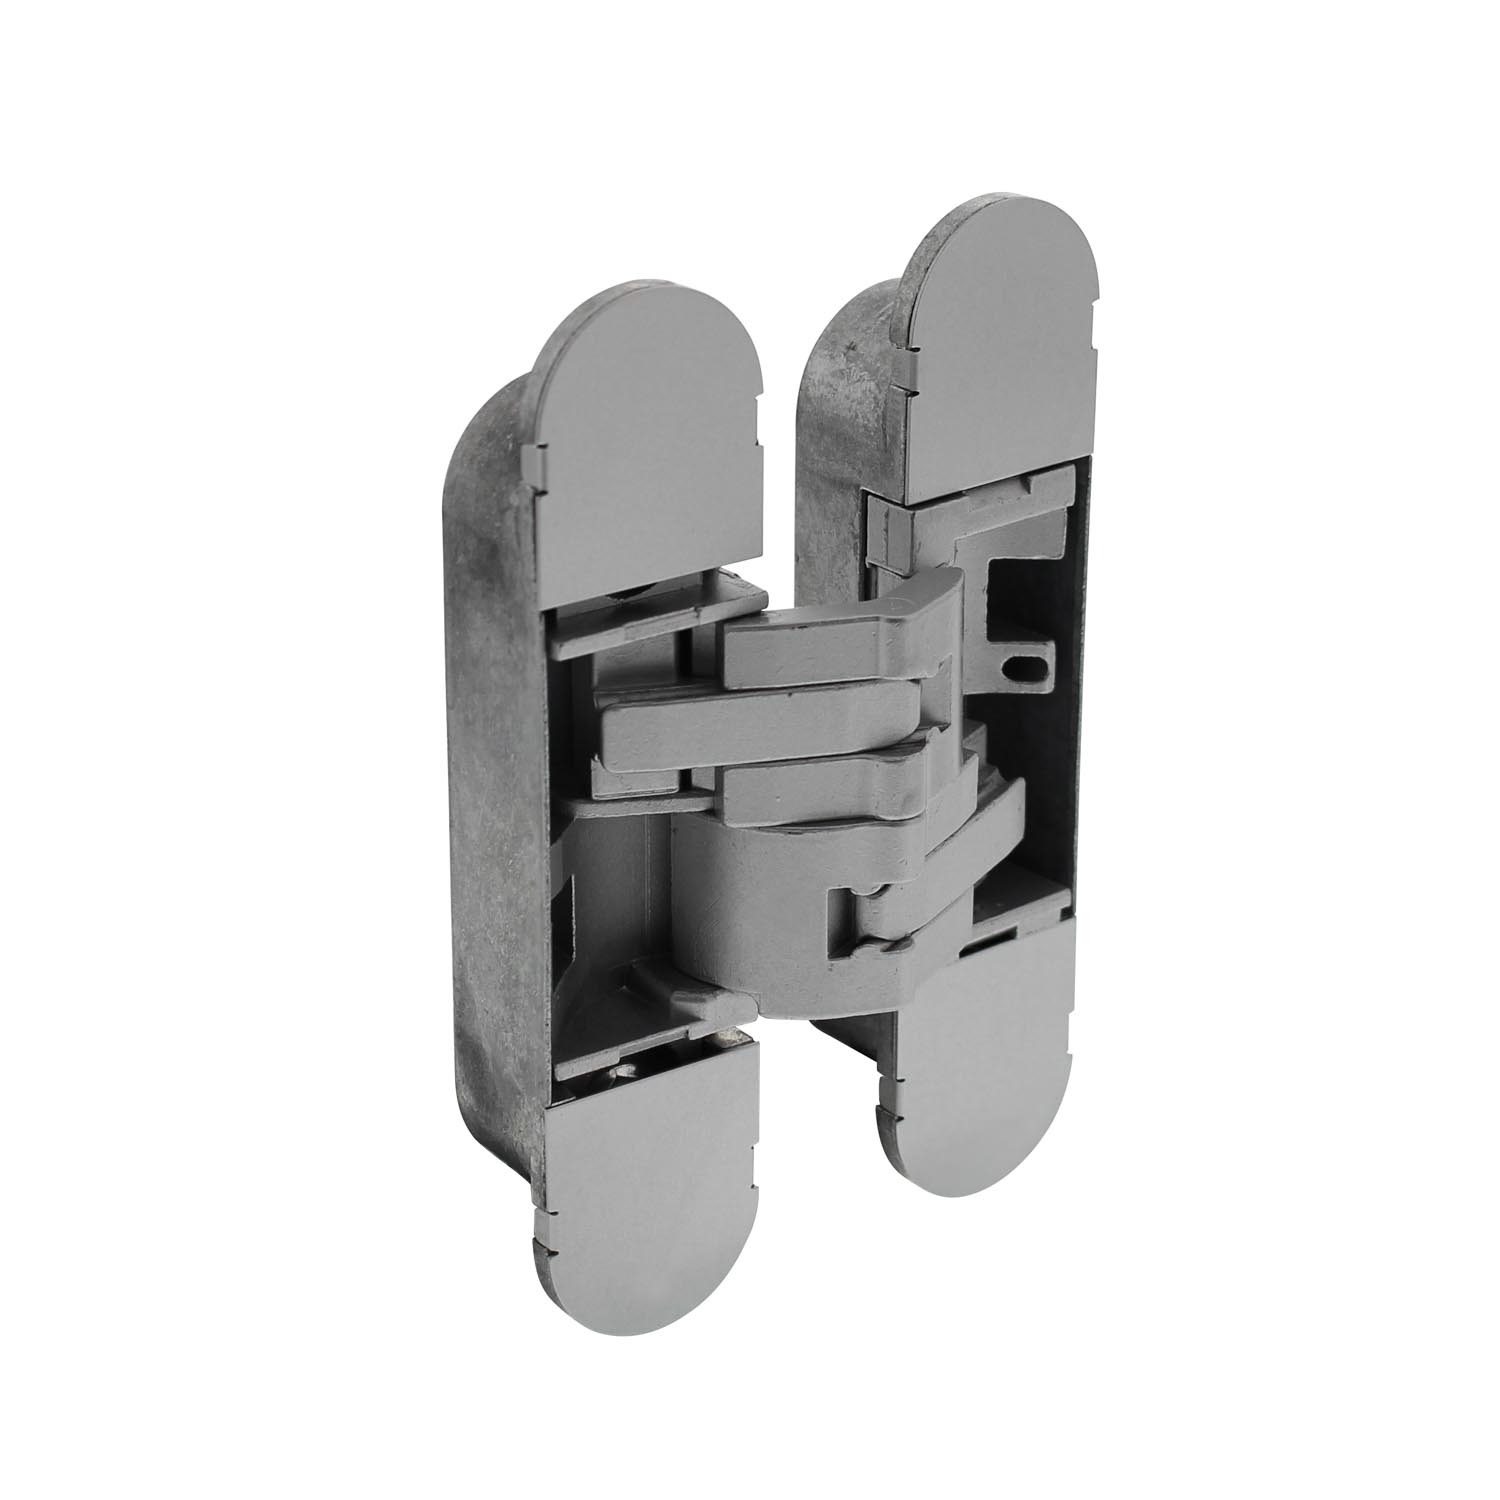 Invisible concealed hinge 130 x 30 mm silver gray 3D adjustable